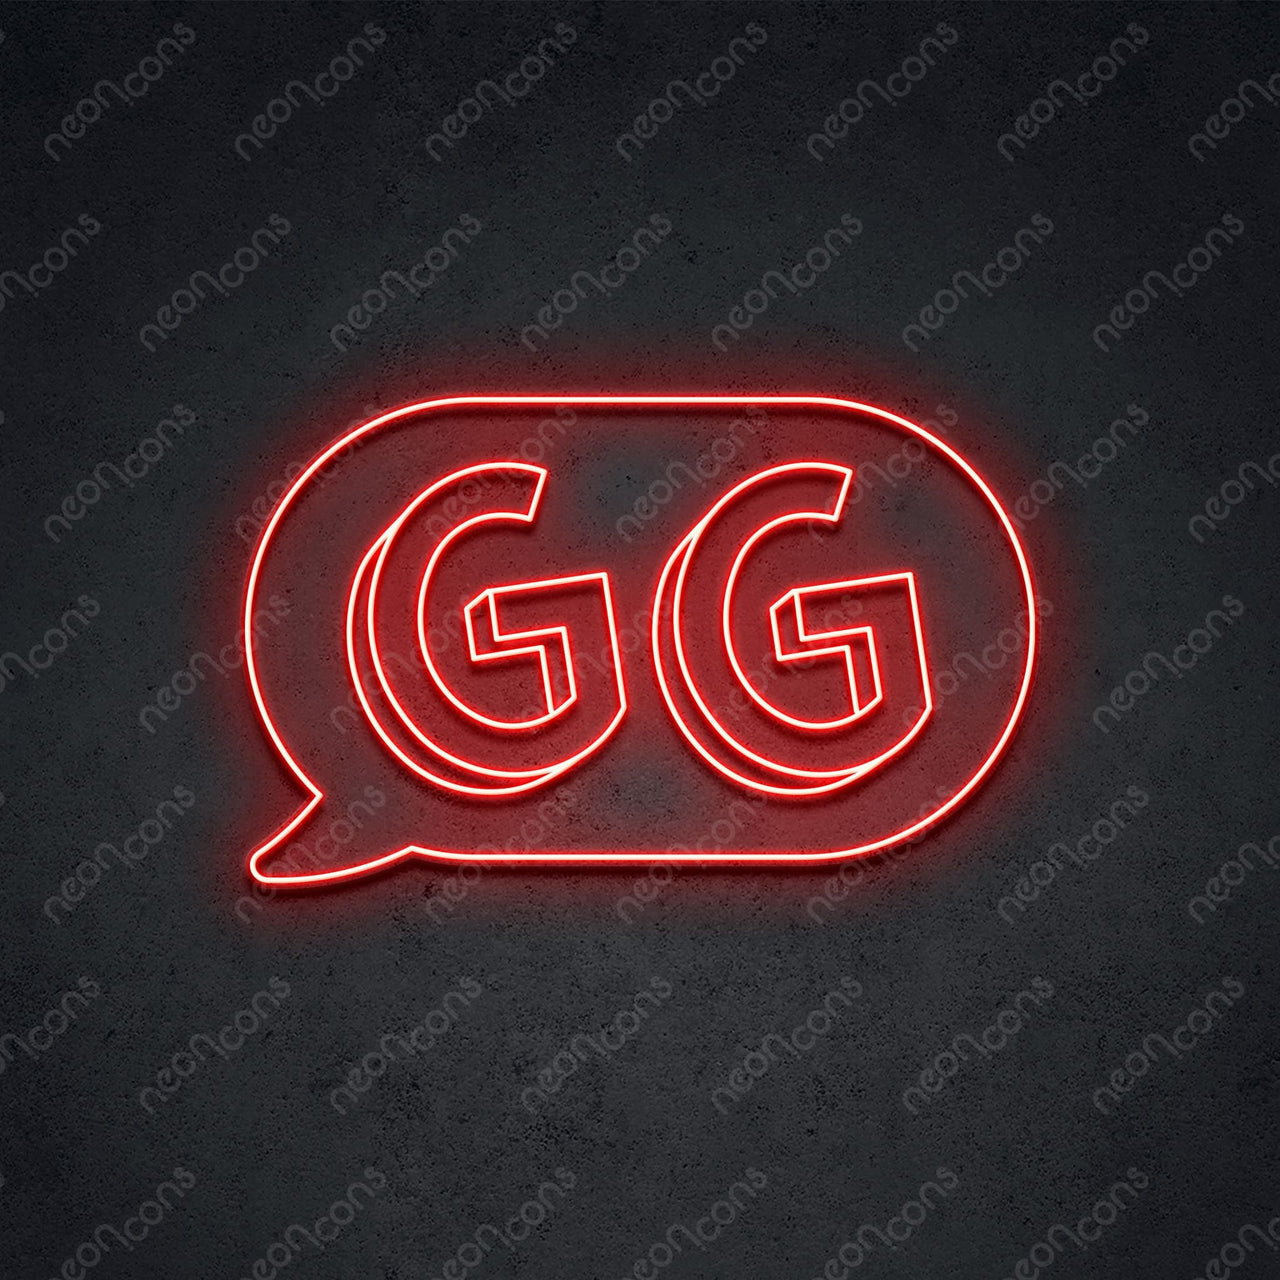 'GG In The Chat' Neon Sign 45cm (1.5ft) / Red / LED by Neon Icons